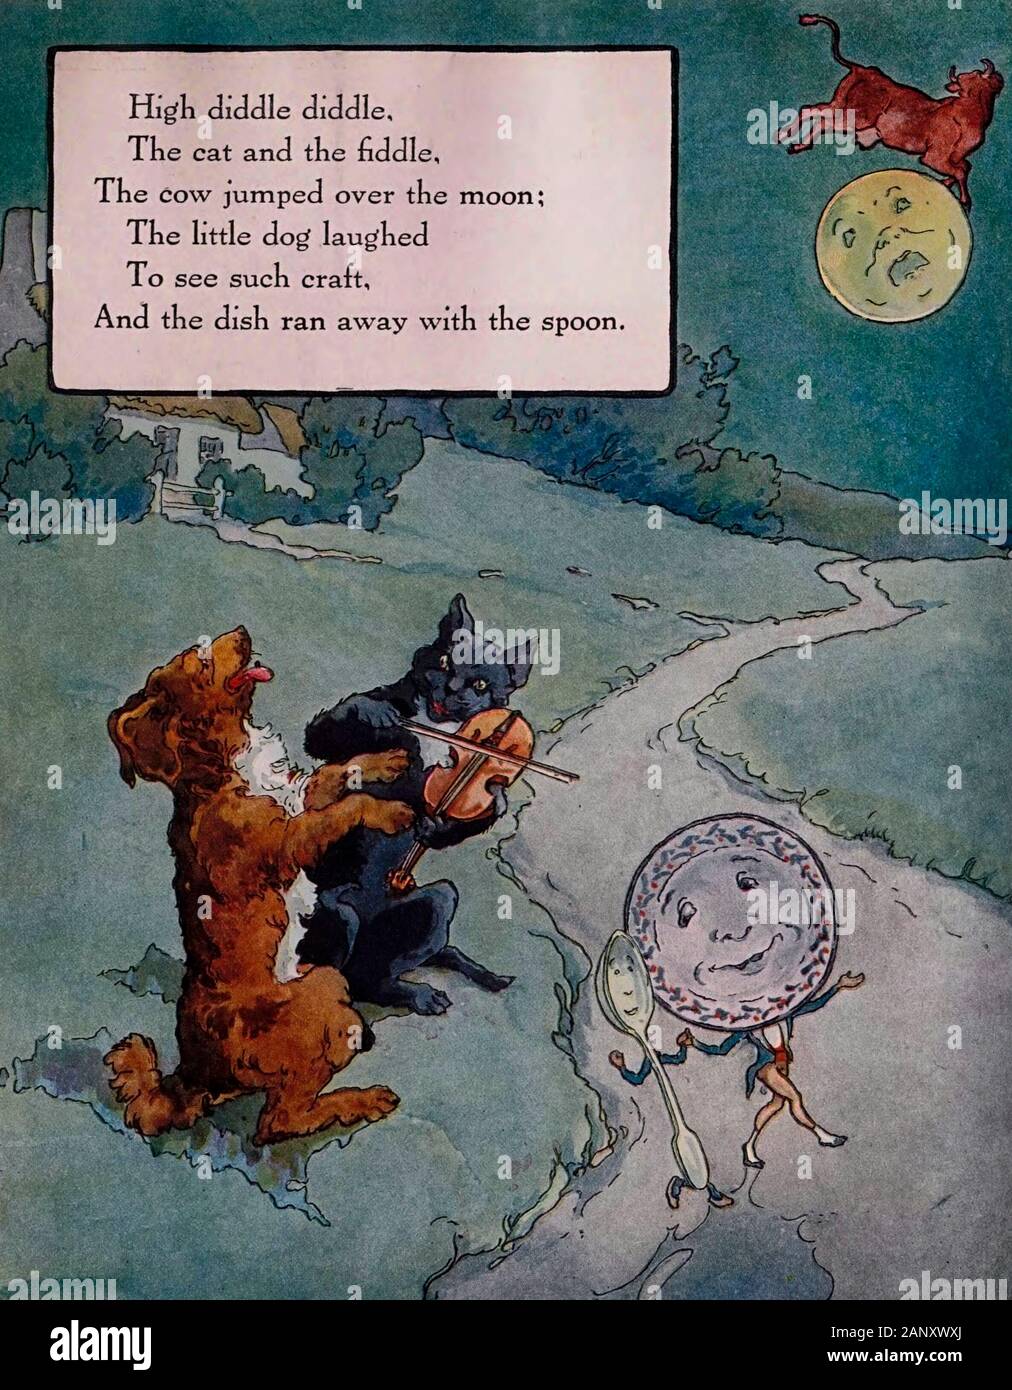 High Diddle Diddle, the Cat and the Fiddle, The Cow jumped over the moon. The little dog laughed to see such craft and the dish ran away with the spoon - Vintage illustration of Nursery Rhyme Stock Photo